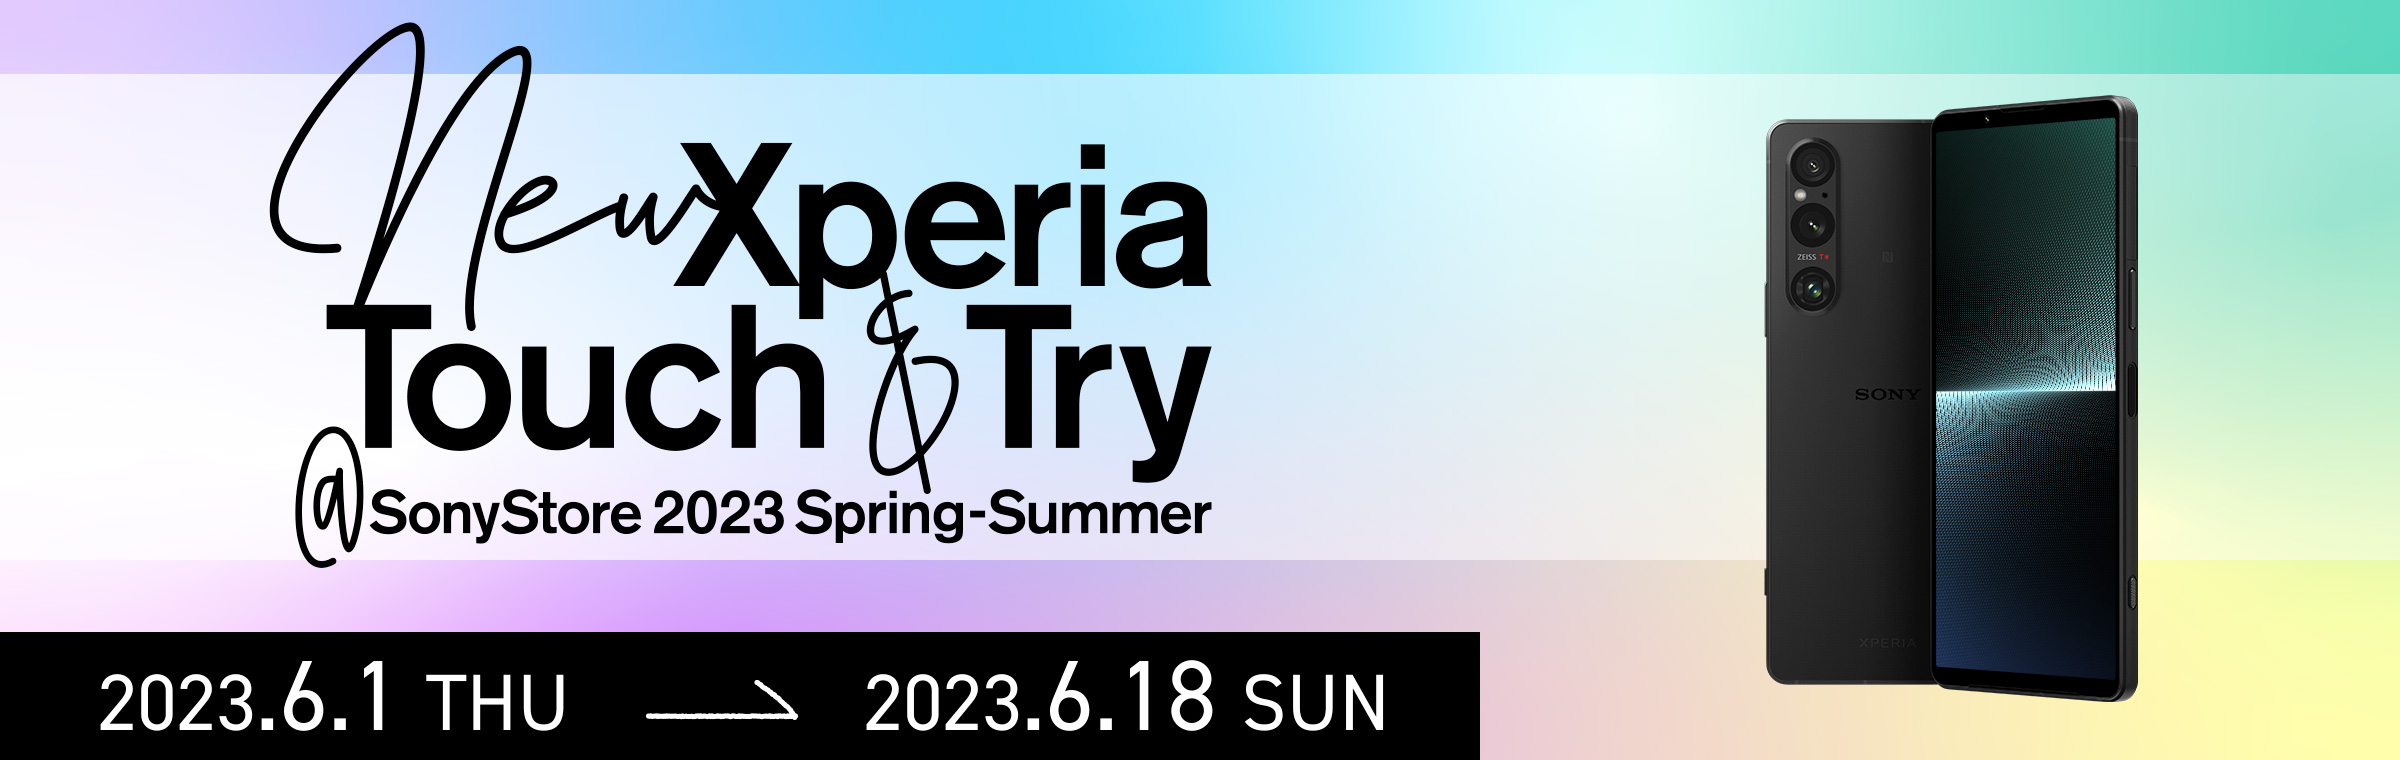 NewXperia Touch&Try SonyStore 2023 Spring-Summer 2023.6.1 THU → 2023.6.18 SUN